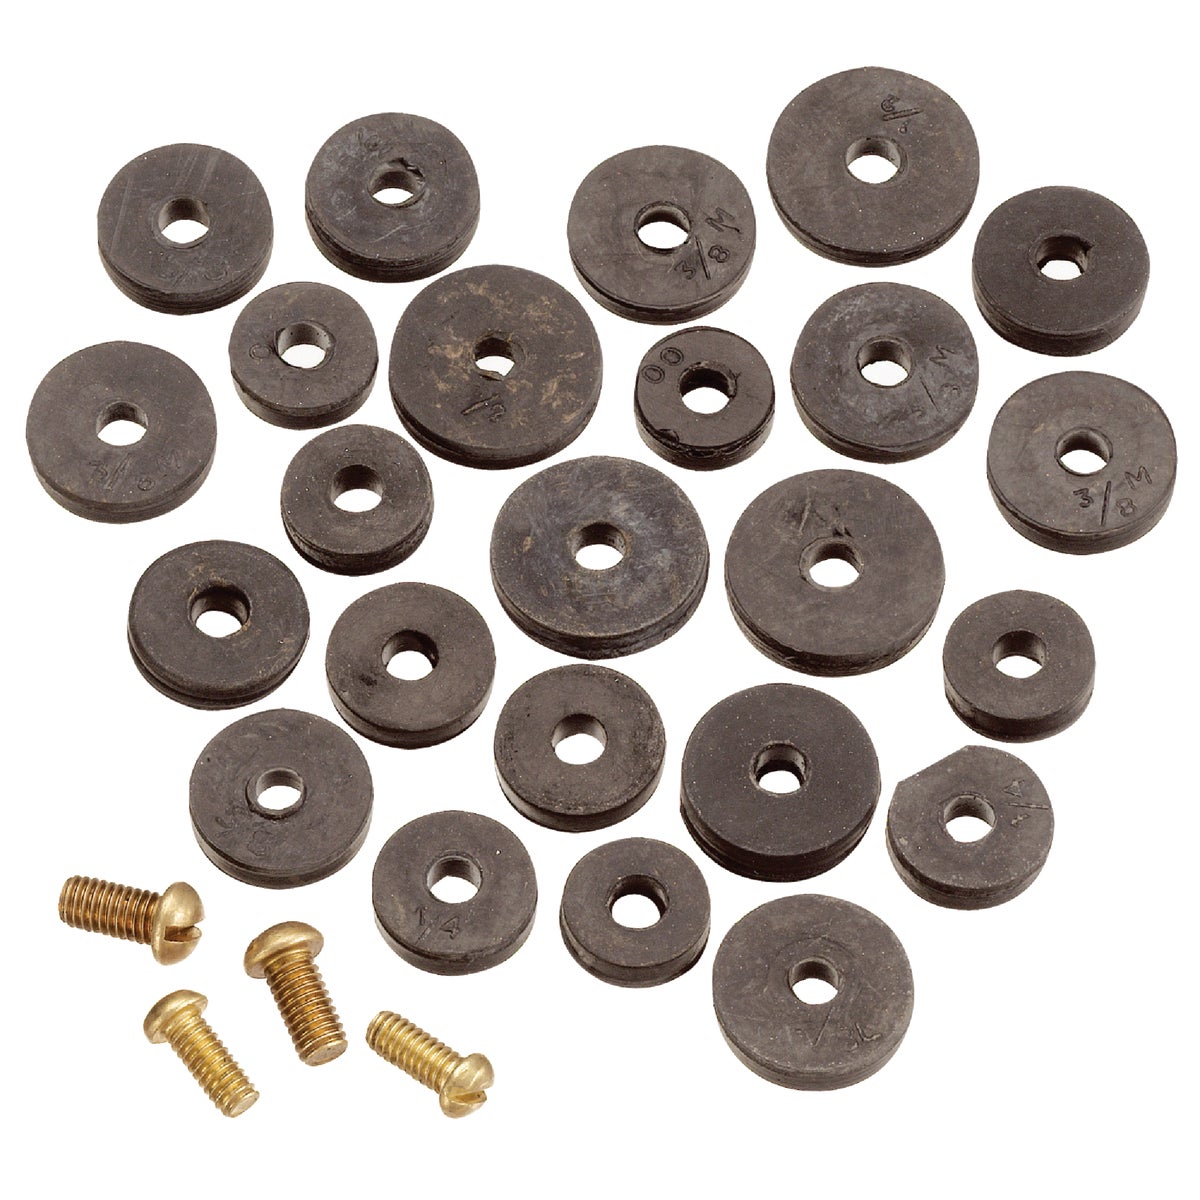 Item 426943, 20 flat faucet washers of assorted sizes, and 4 brass screws